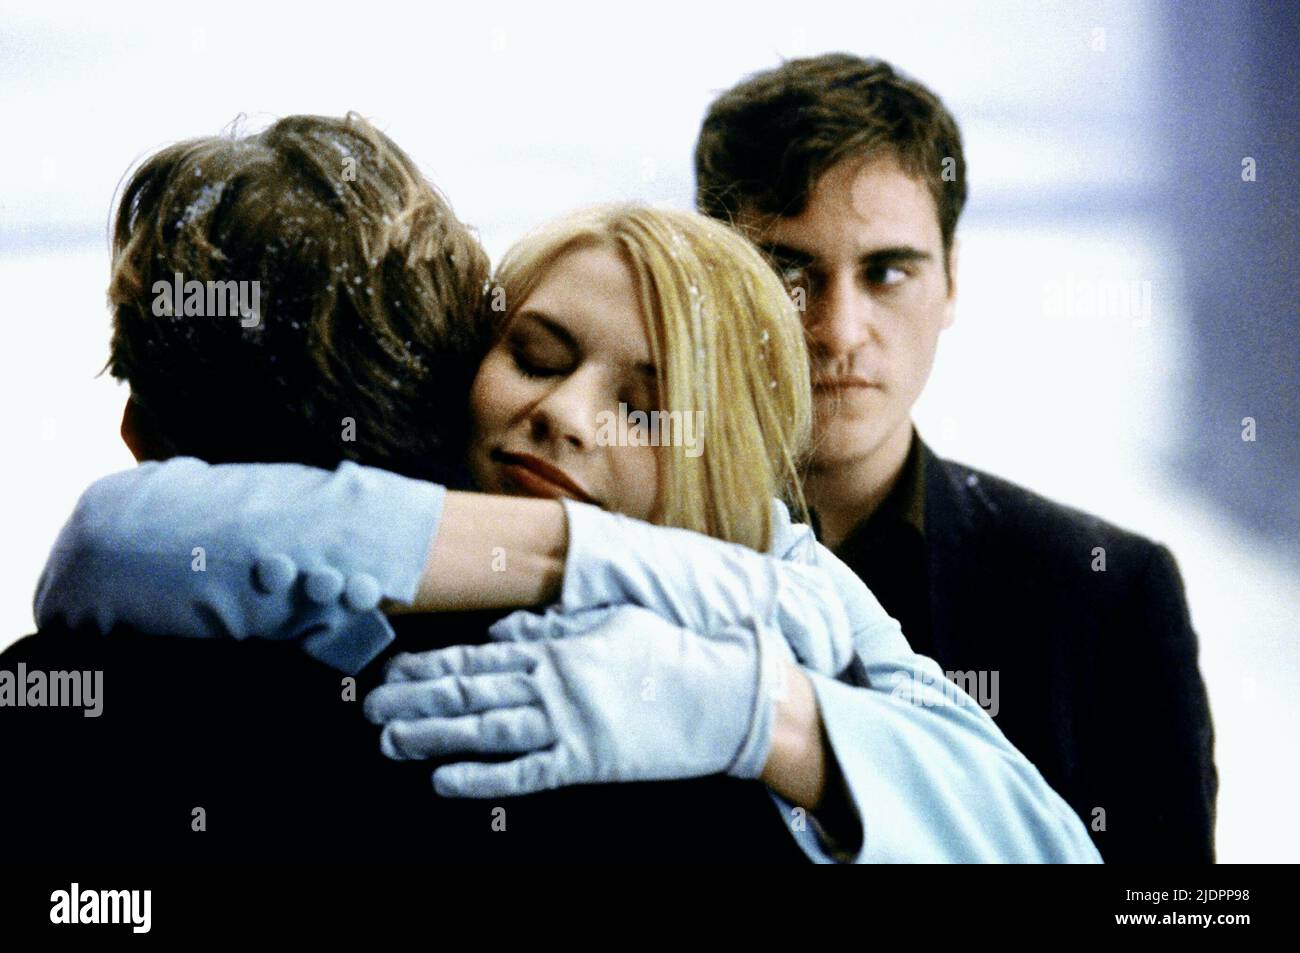 HENSHALL,DANES,PHOENIX, IT'S ALL ABOUT LOVE, 2003, Stock Photo